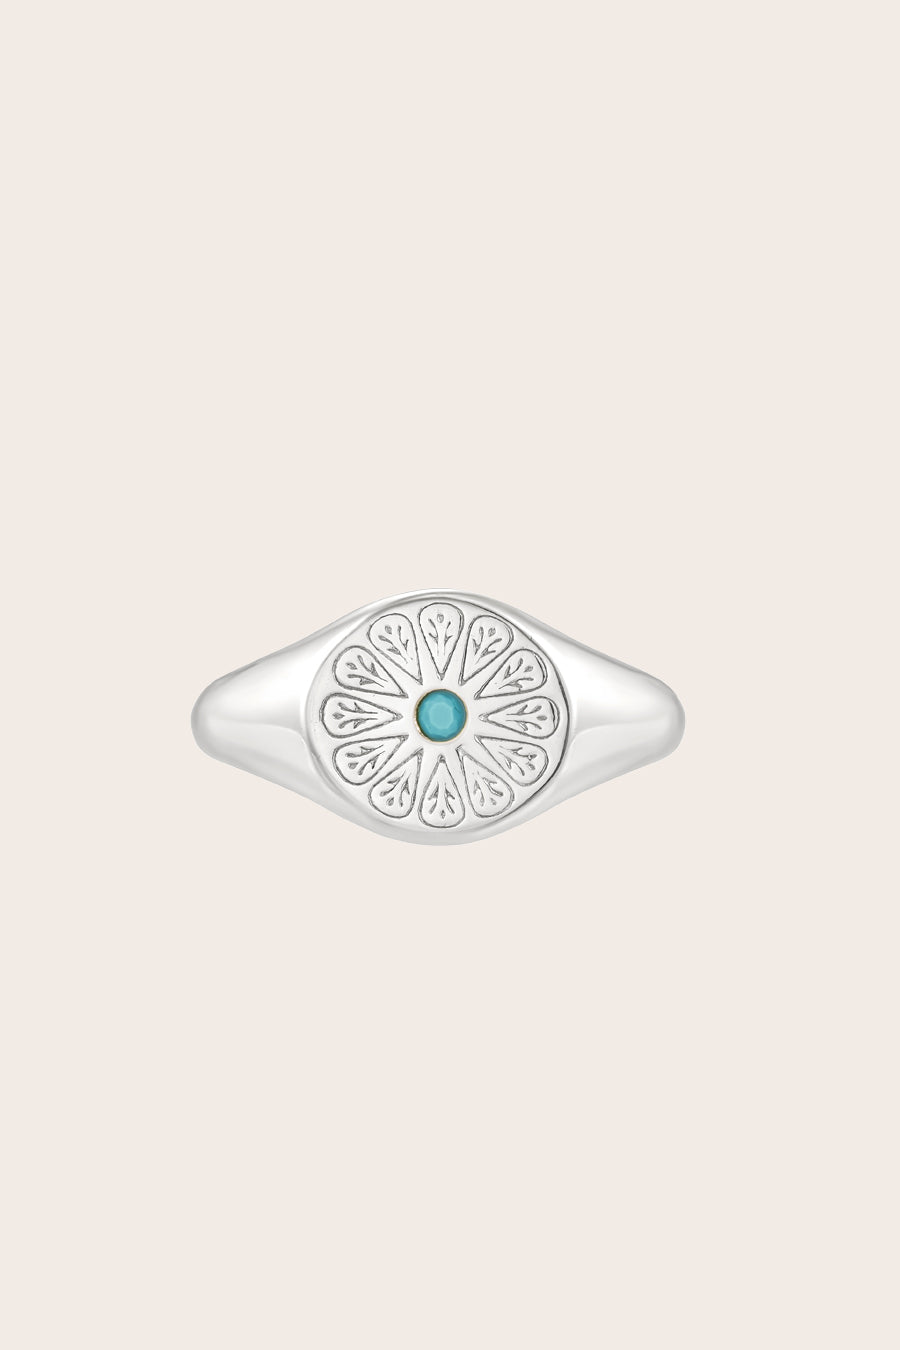 Silver Turquoise Birthstone Signet Ring on cream background